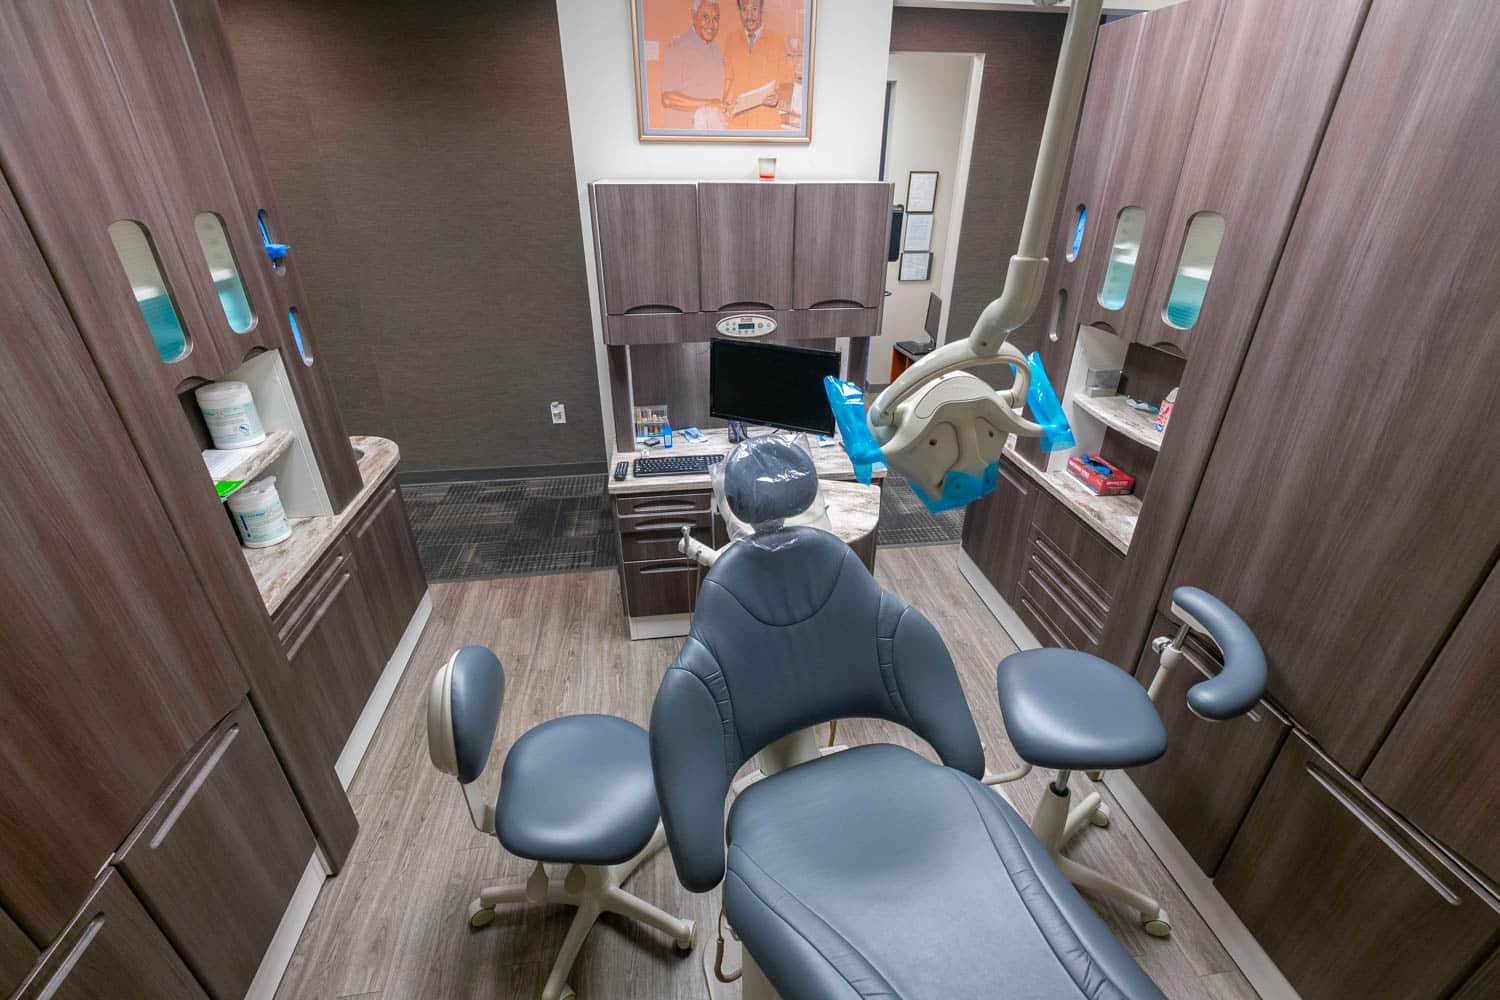 Innovative Smiles - Dental Exam and Treatment Room view from above